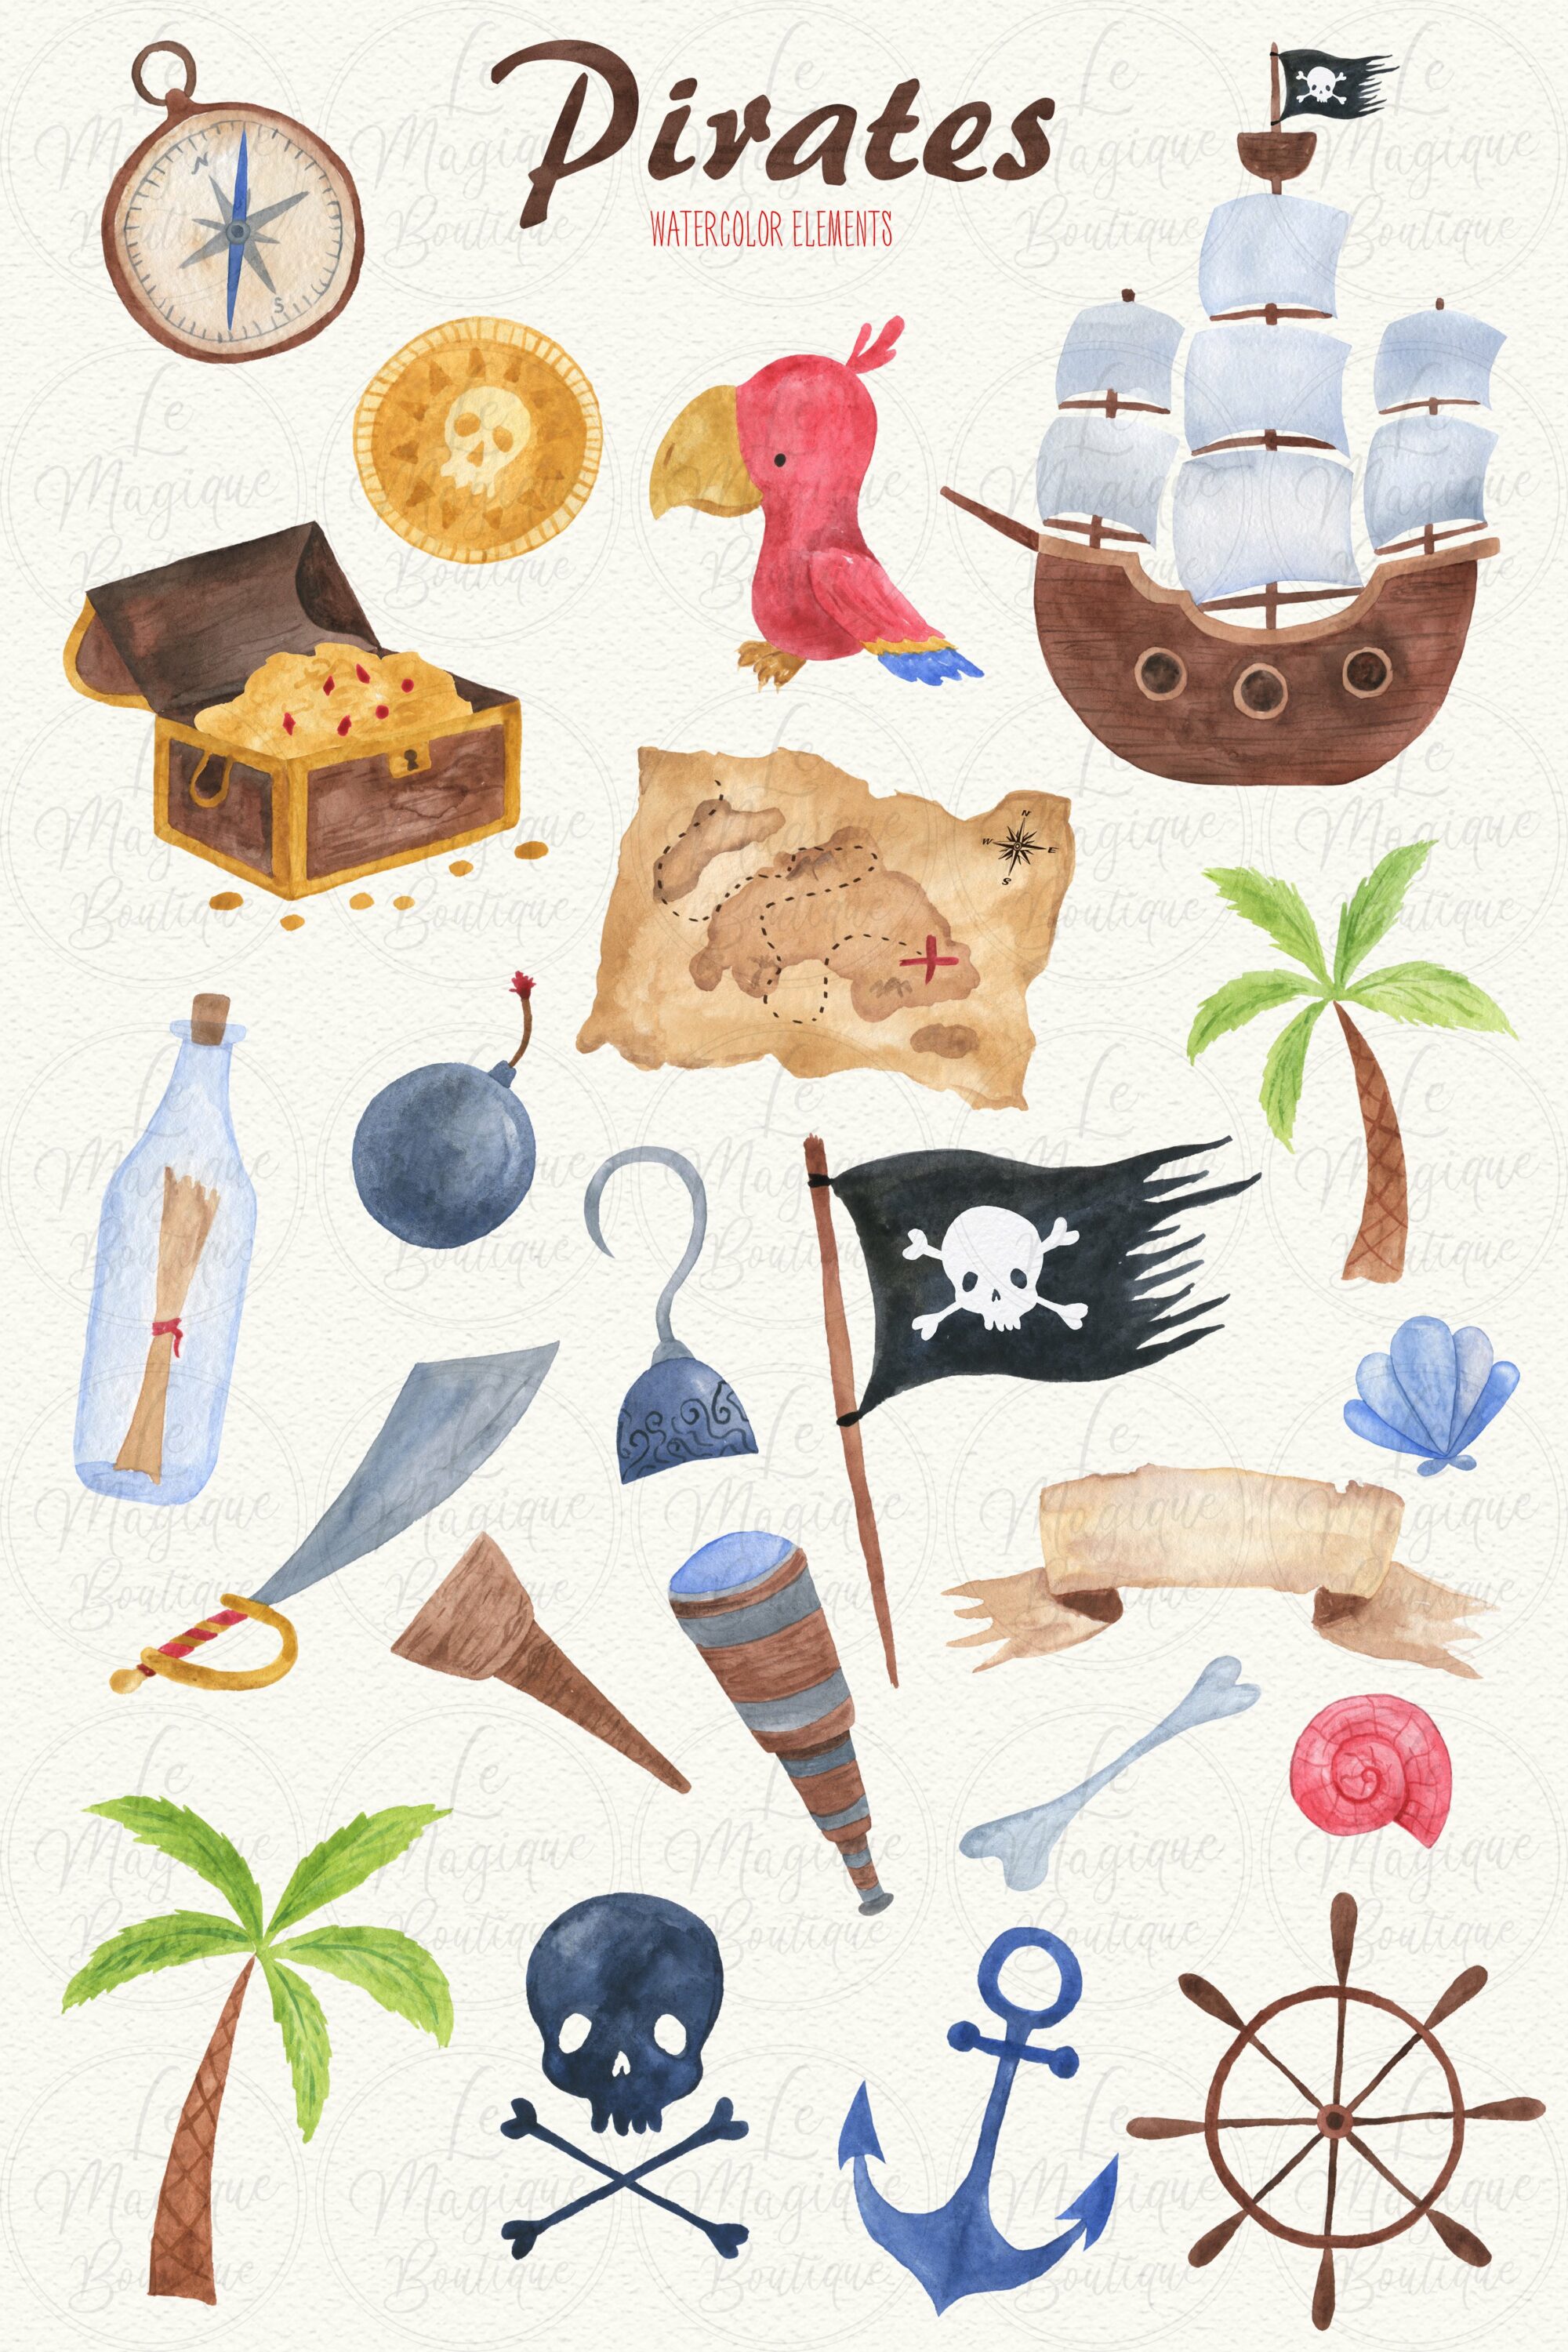 Nice watercolor set to create a normal pirate illustration.